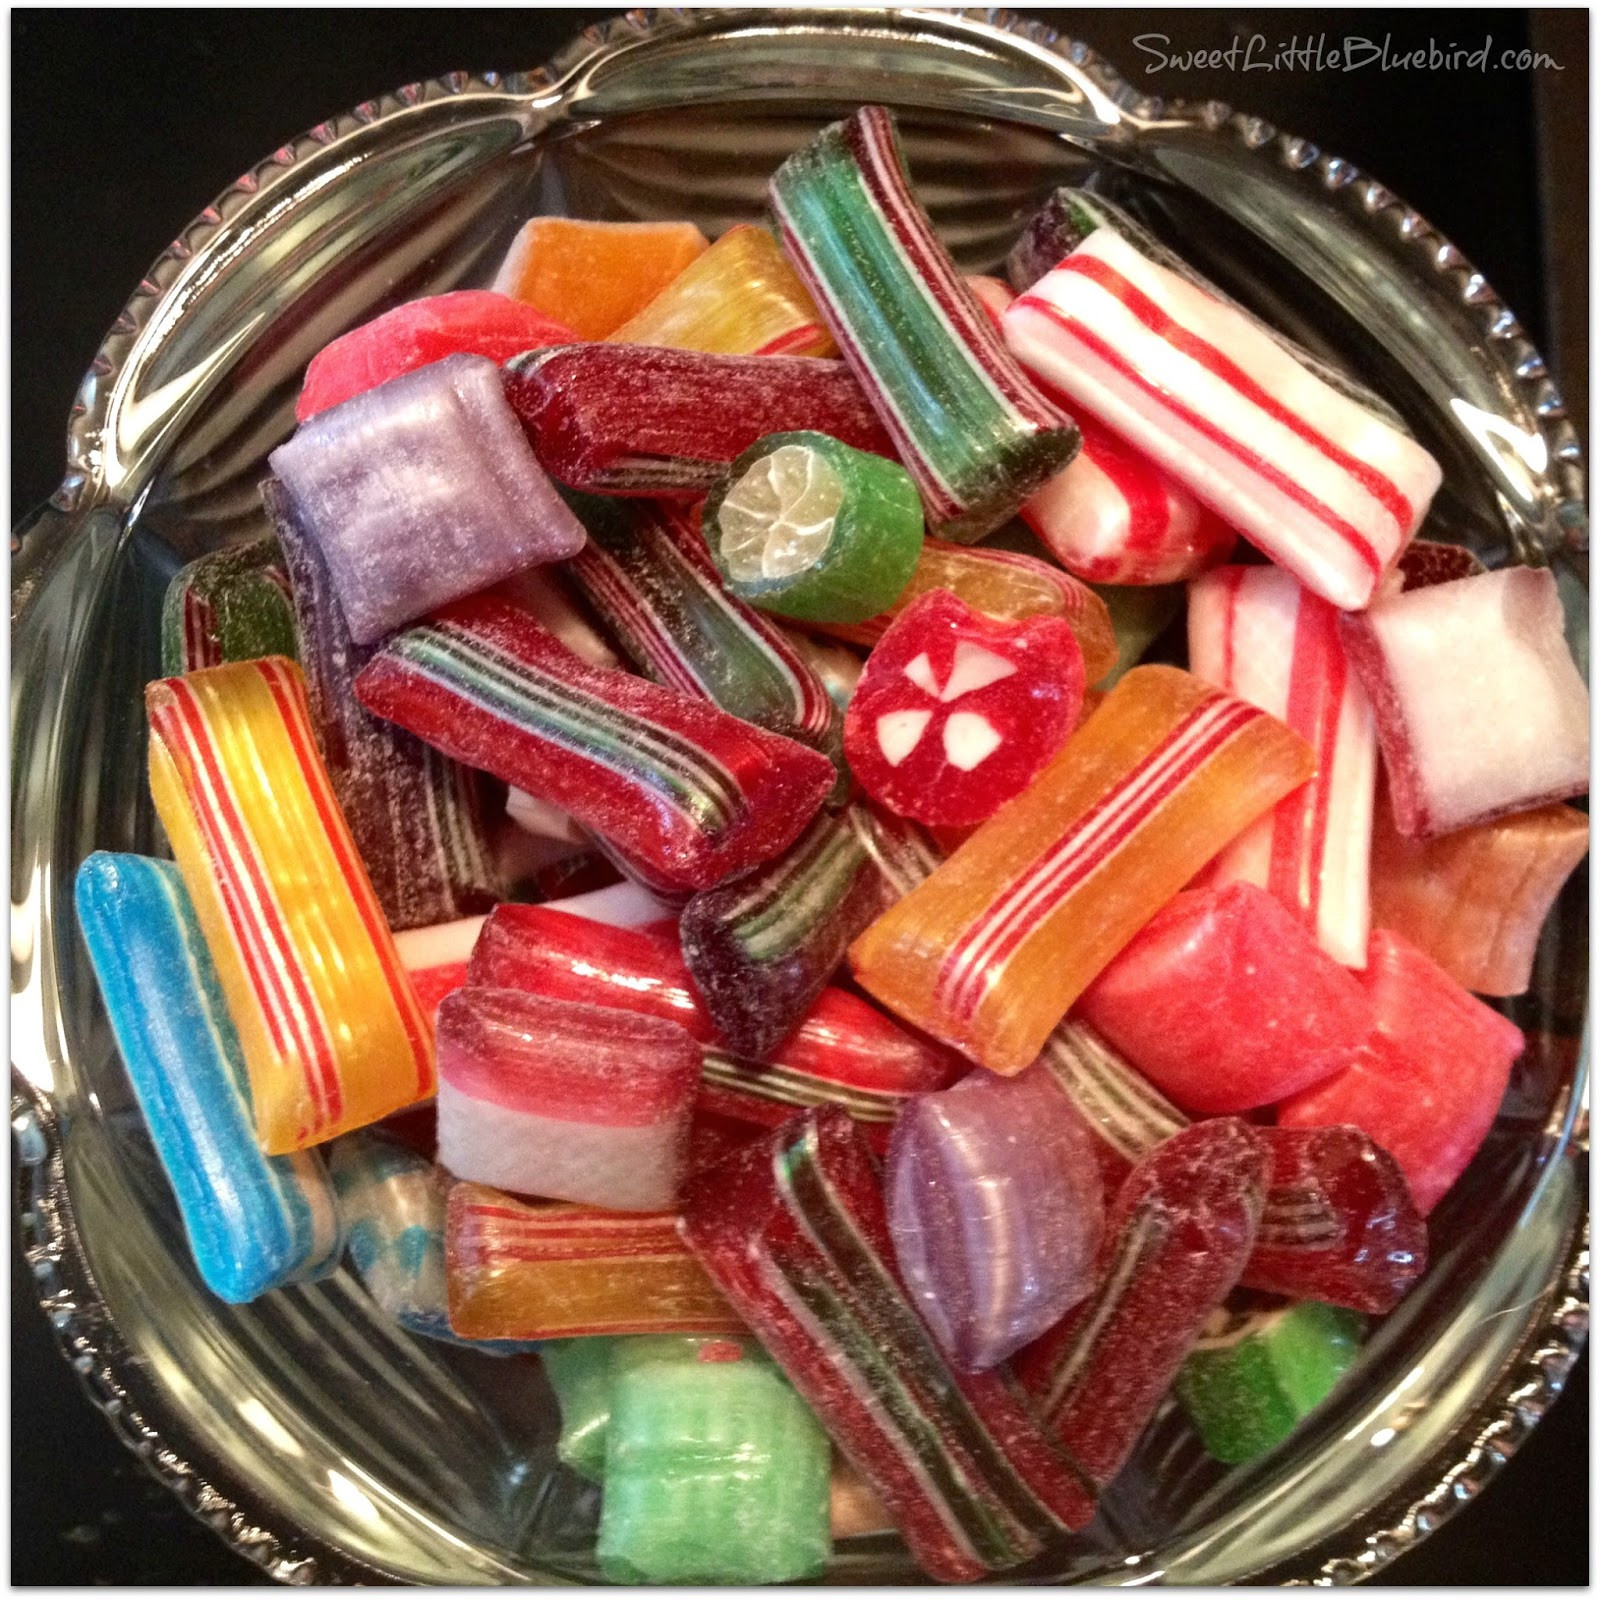 Old Fashioned Filled Christmas Candy
 Sweet Little Bluebird Old Fashioned Holiday Christmas Candy